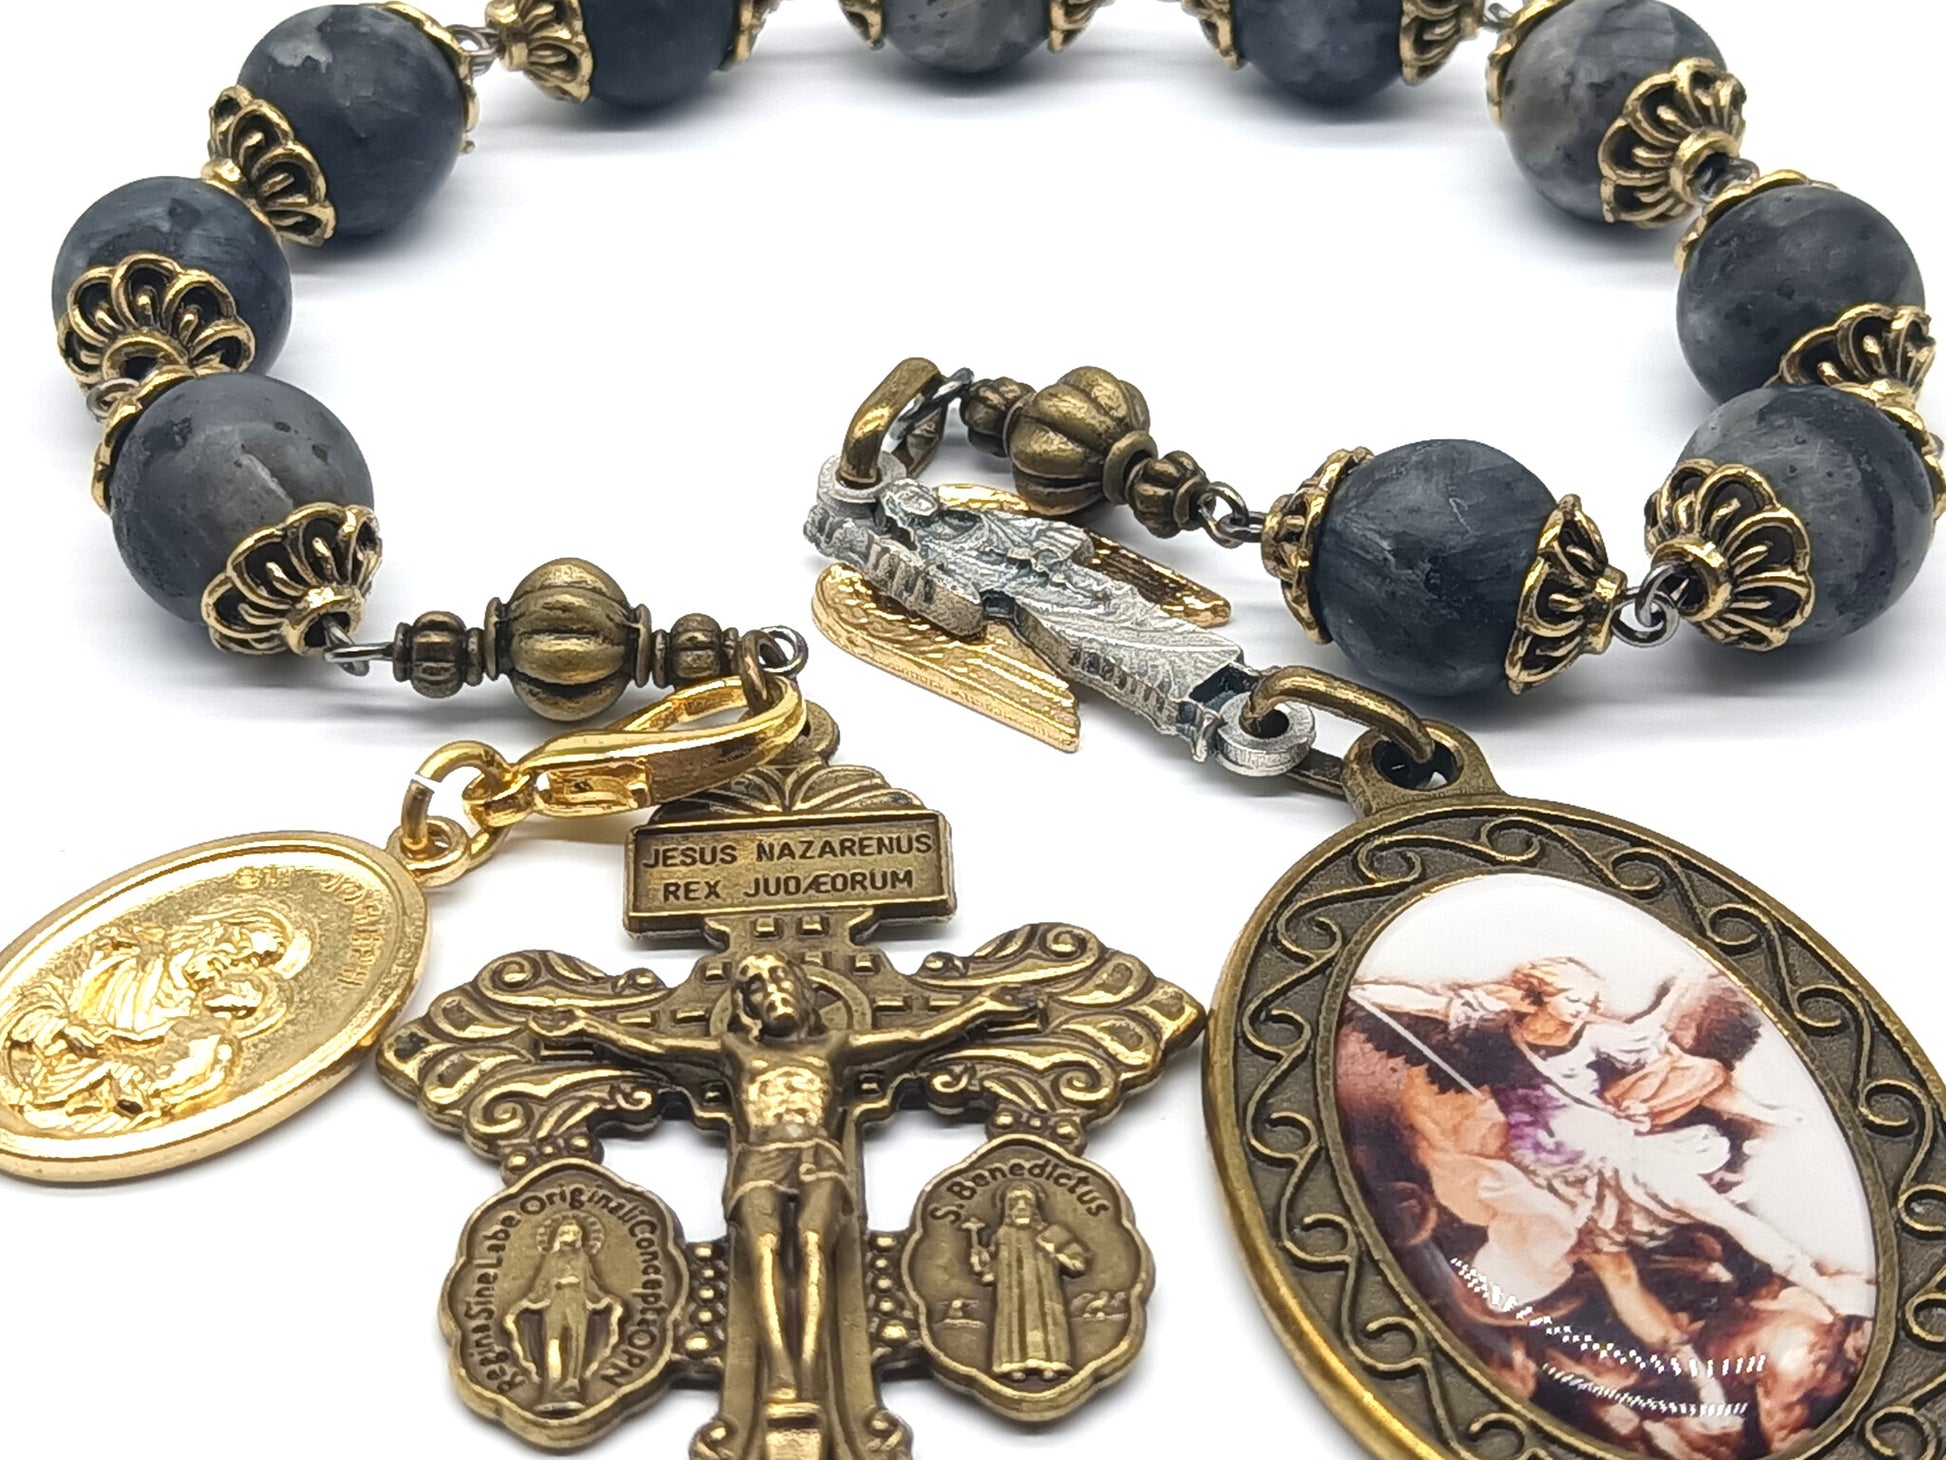 Saint Michael unique decade rosary beads with gemstone beads and bronze pardon crucifix, Saint Michael picture medal and bronze bead caps.